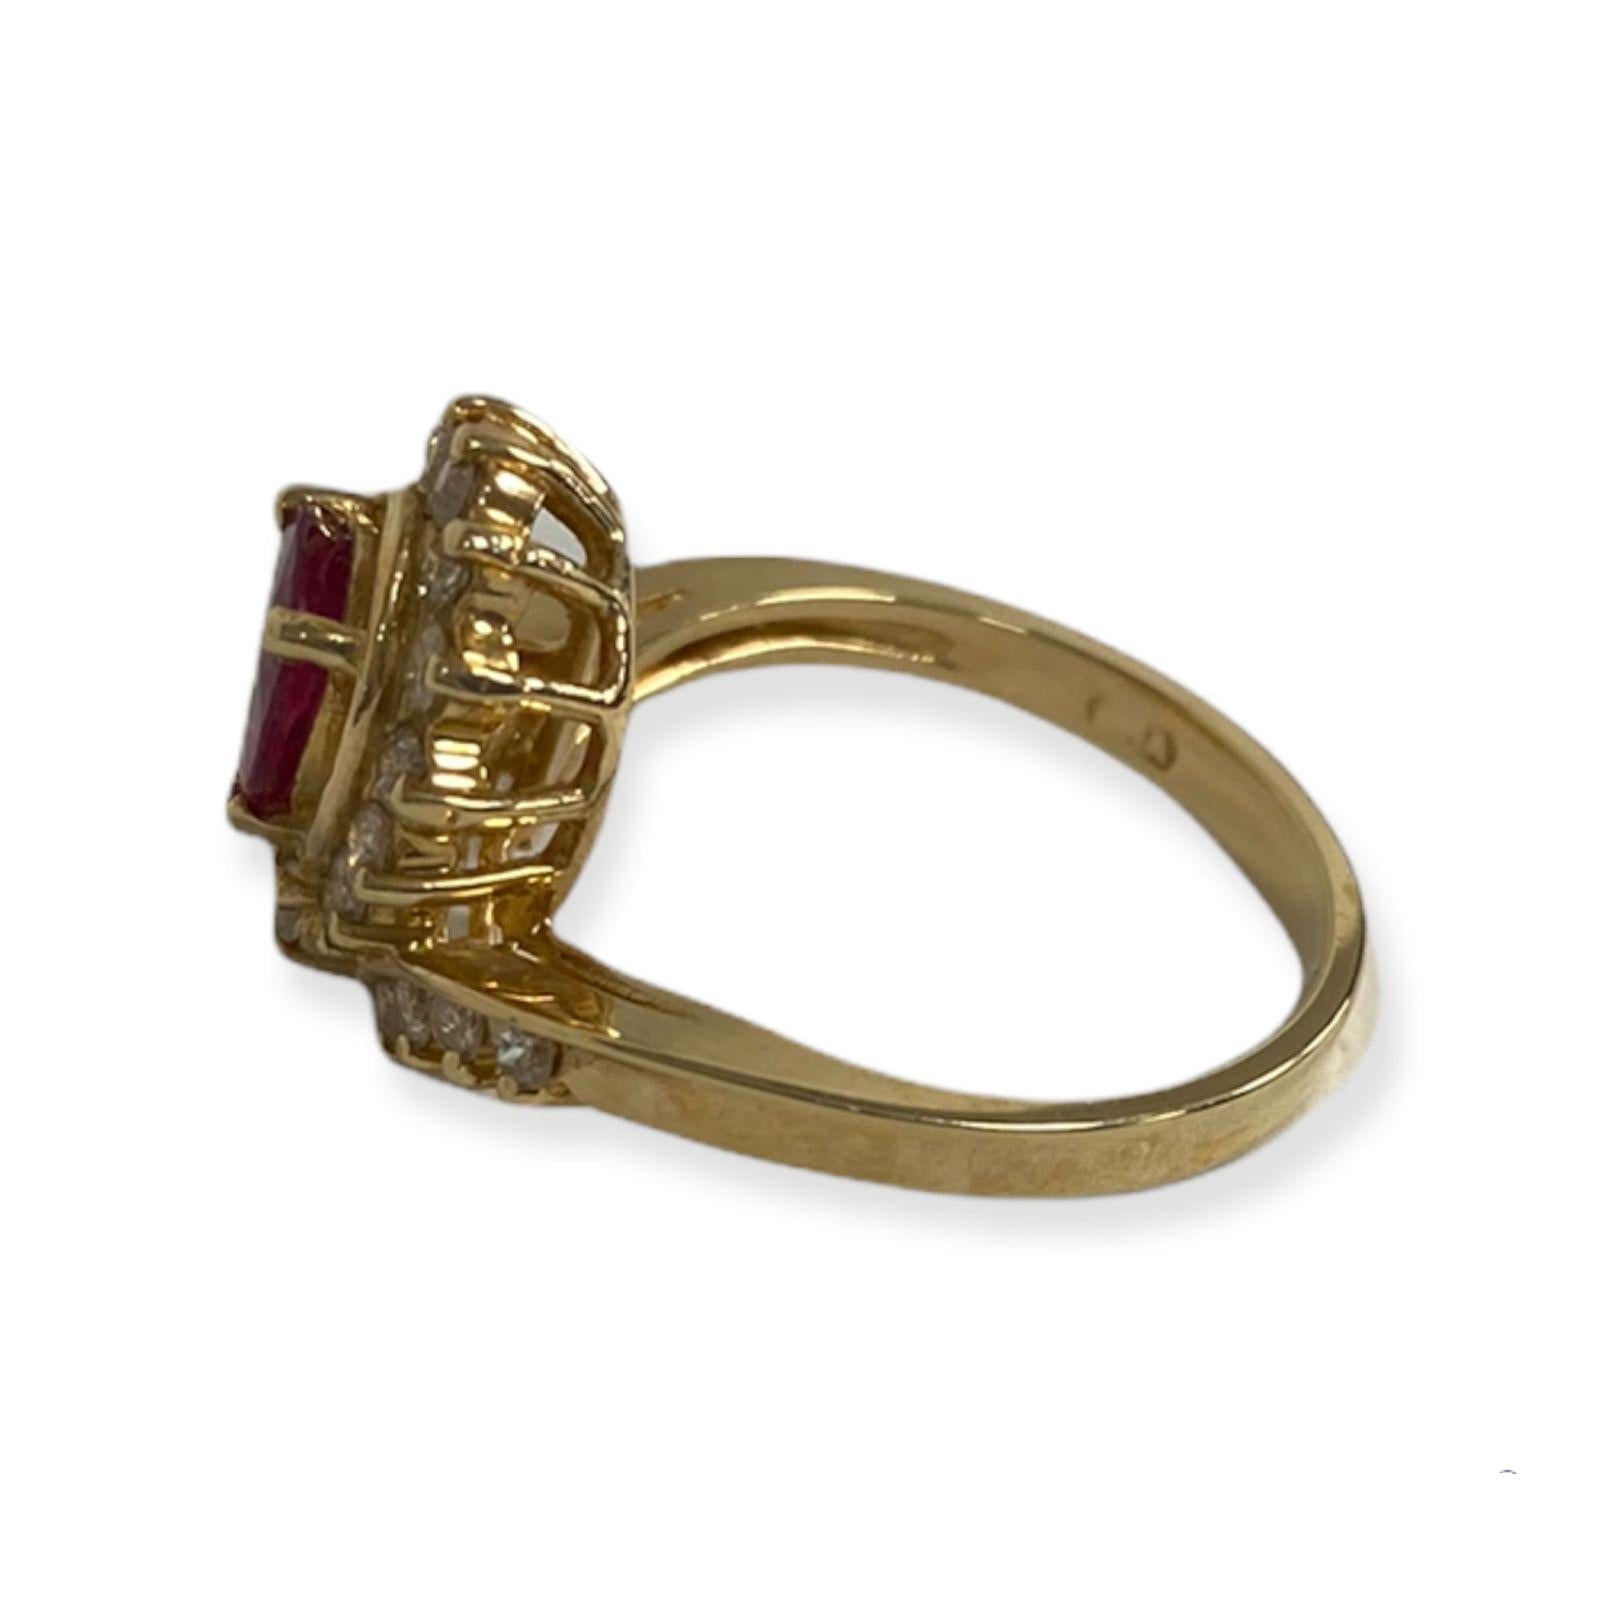 This spectacular ring from the Suzy Levian collection features 14k gold. An array of white diamonds (.50cttw) accent the perfect red color of the ruby gemstone center stone (1.00ct) The brilliance of these gems and the luster of the high-polish